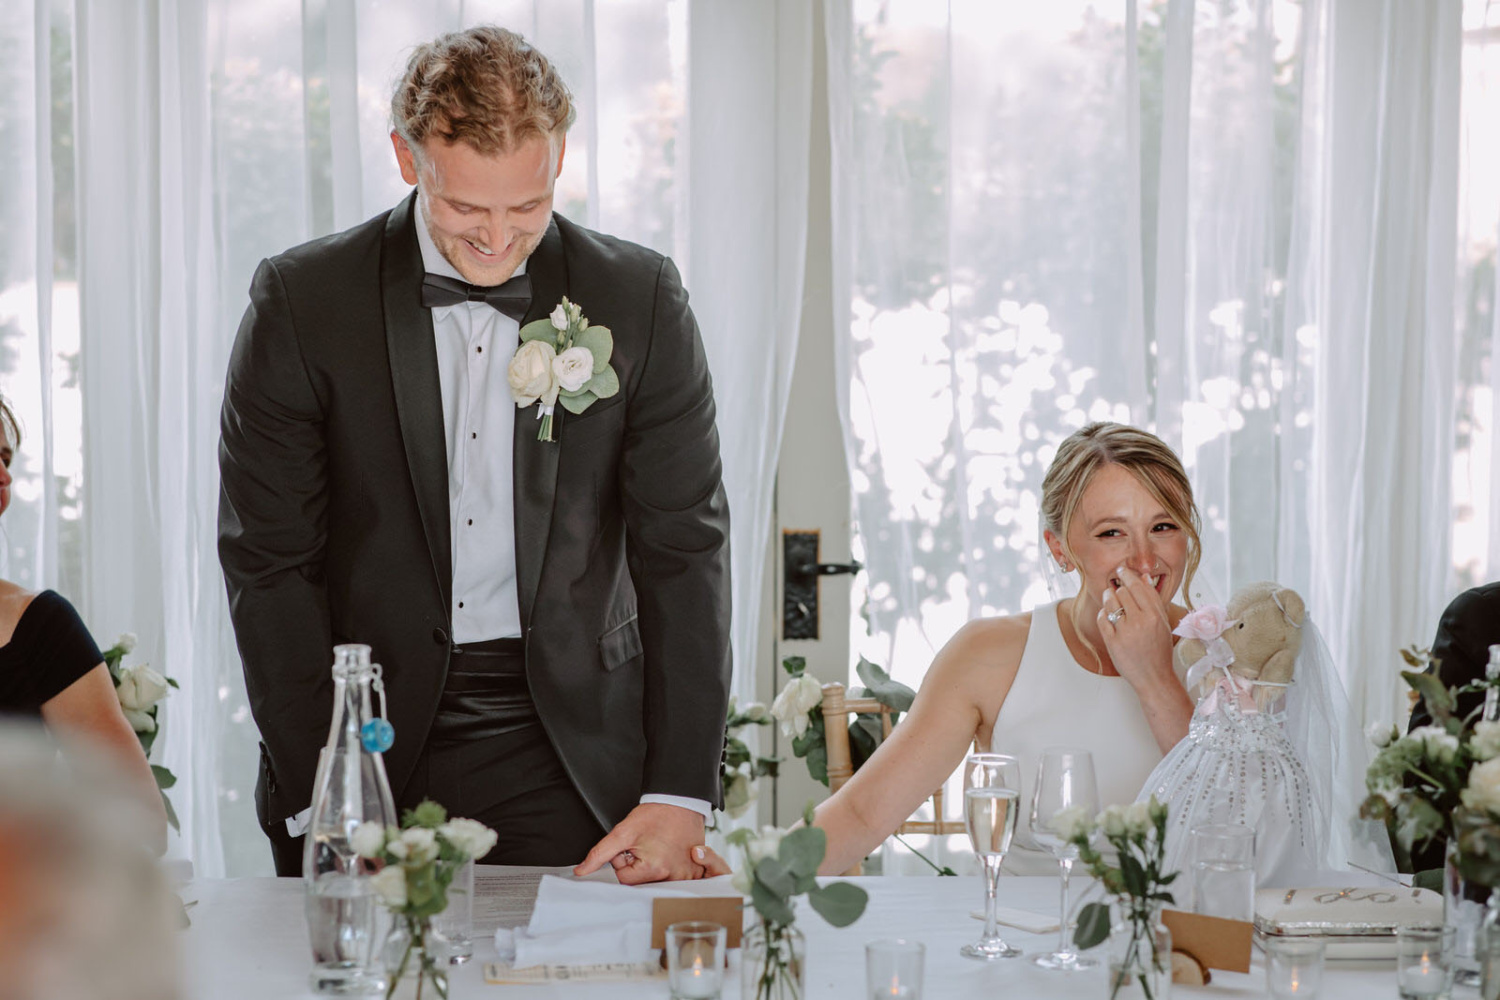 A man in a tuxedo sits at a table with a bride and groom.